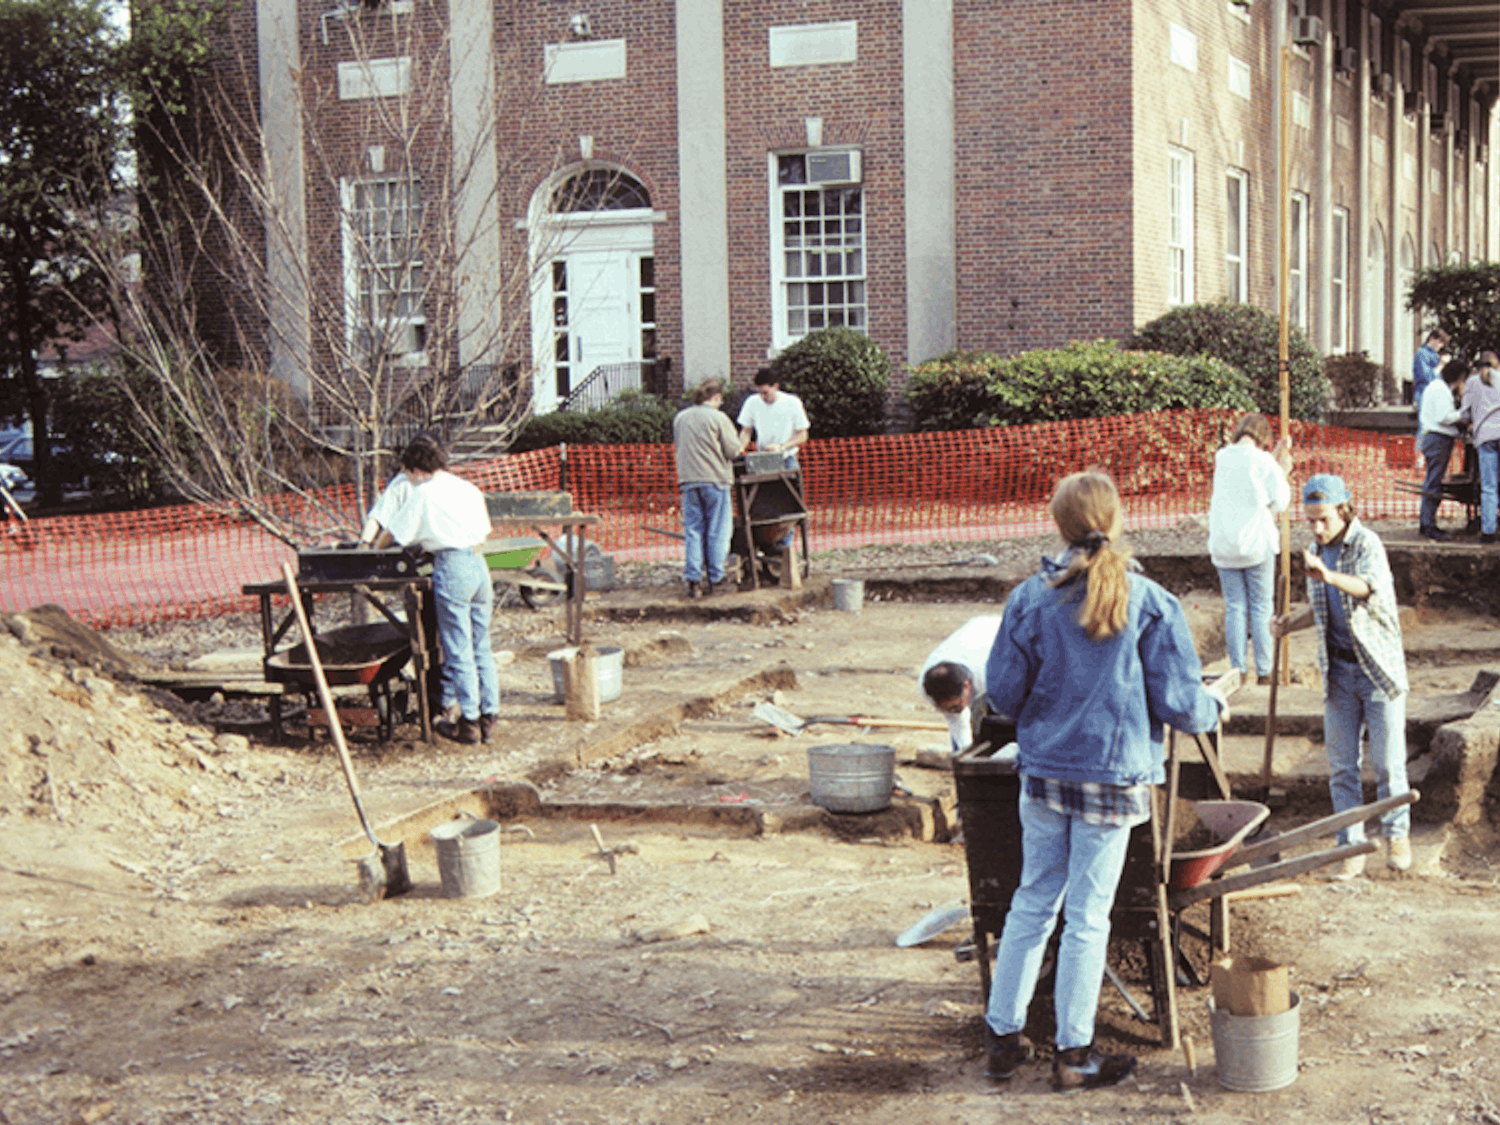 During the Graham Memorial site work in 1993–94, students and faculty conducted their work as an archaeological field school. Photo courtesy of Research Laboratories of Archaeology, UNC-Chapel Hill.